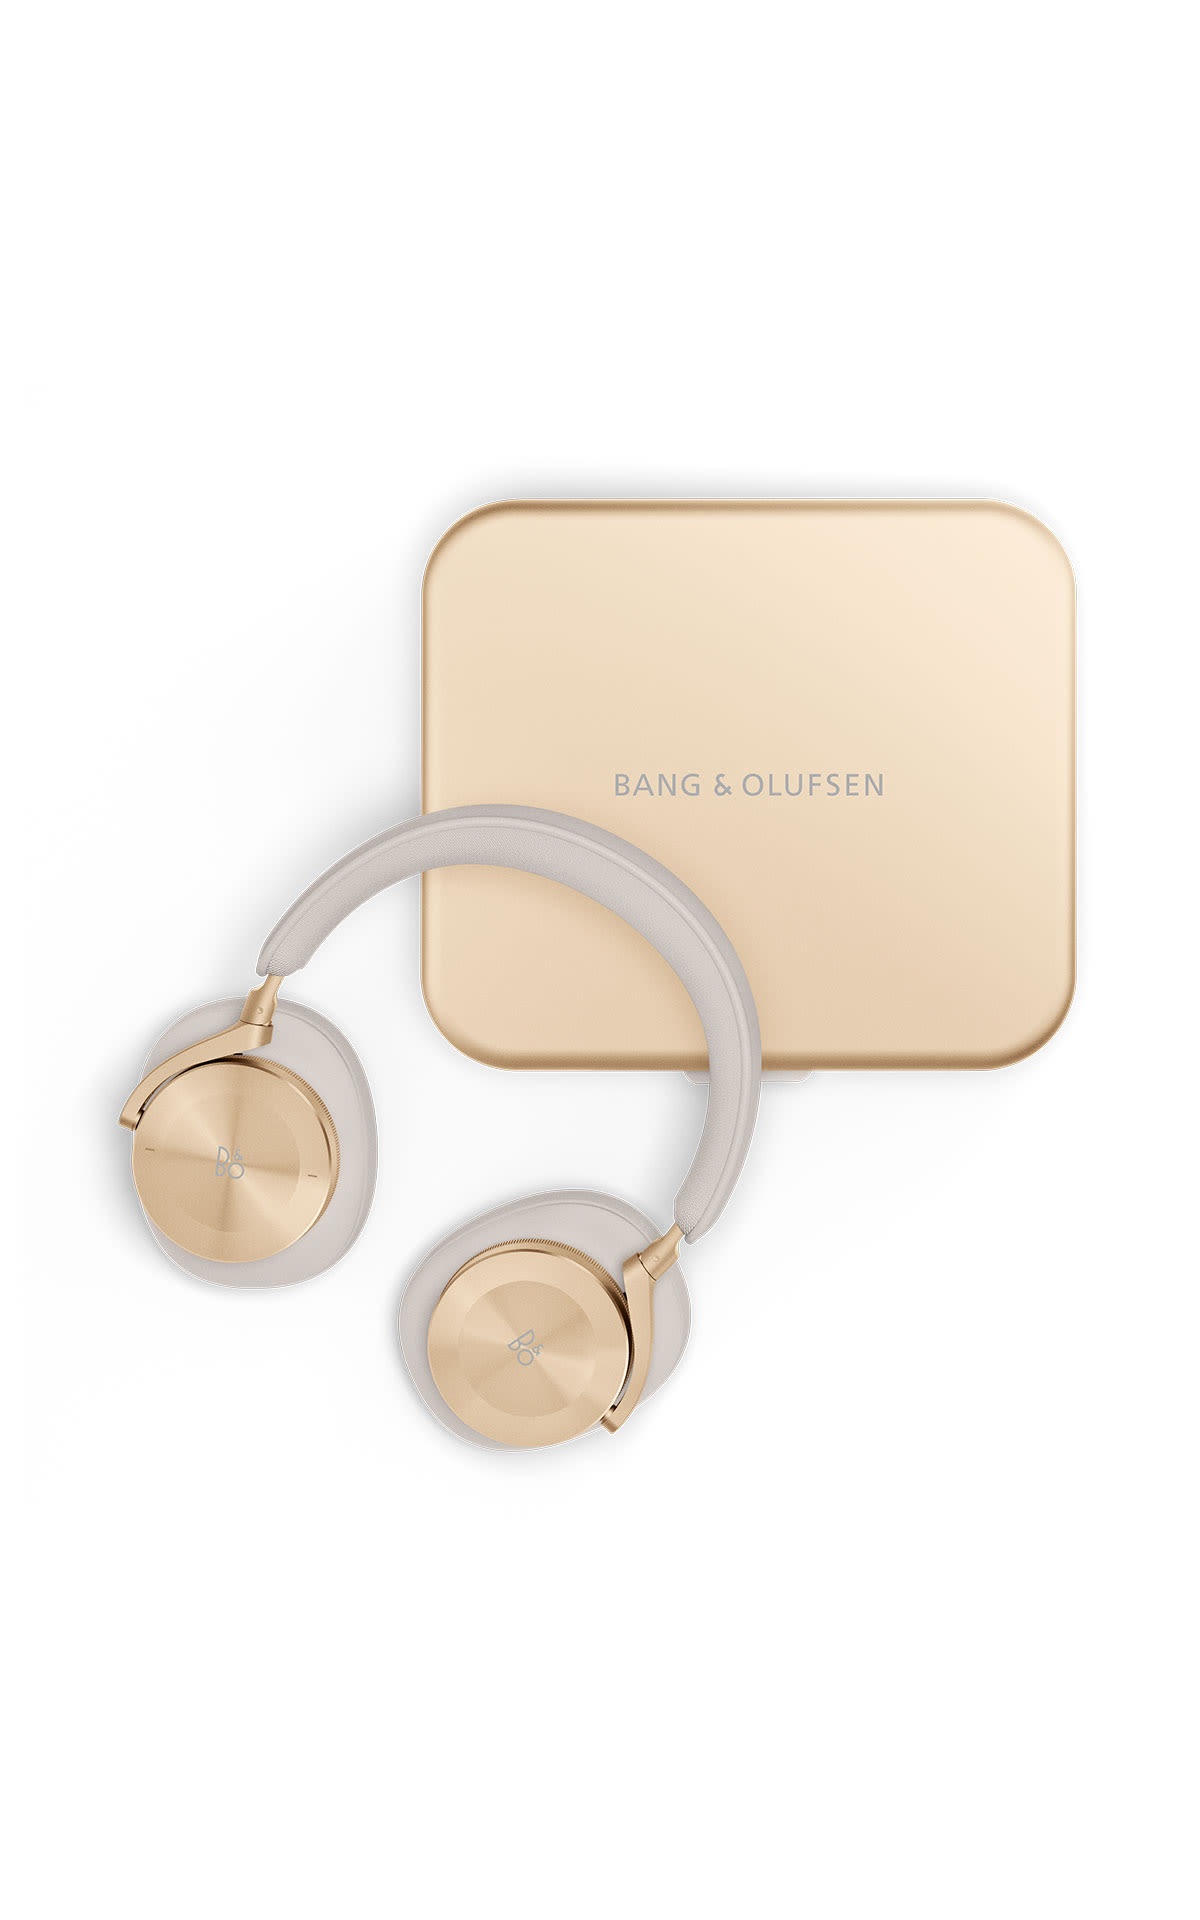 Bang & Olufsen Beoplay H95 from Bicester Village